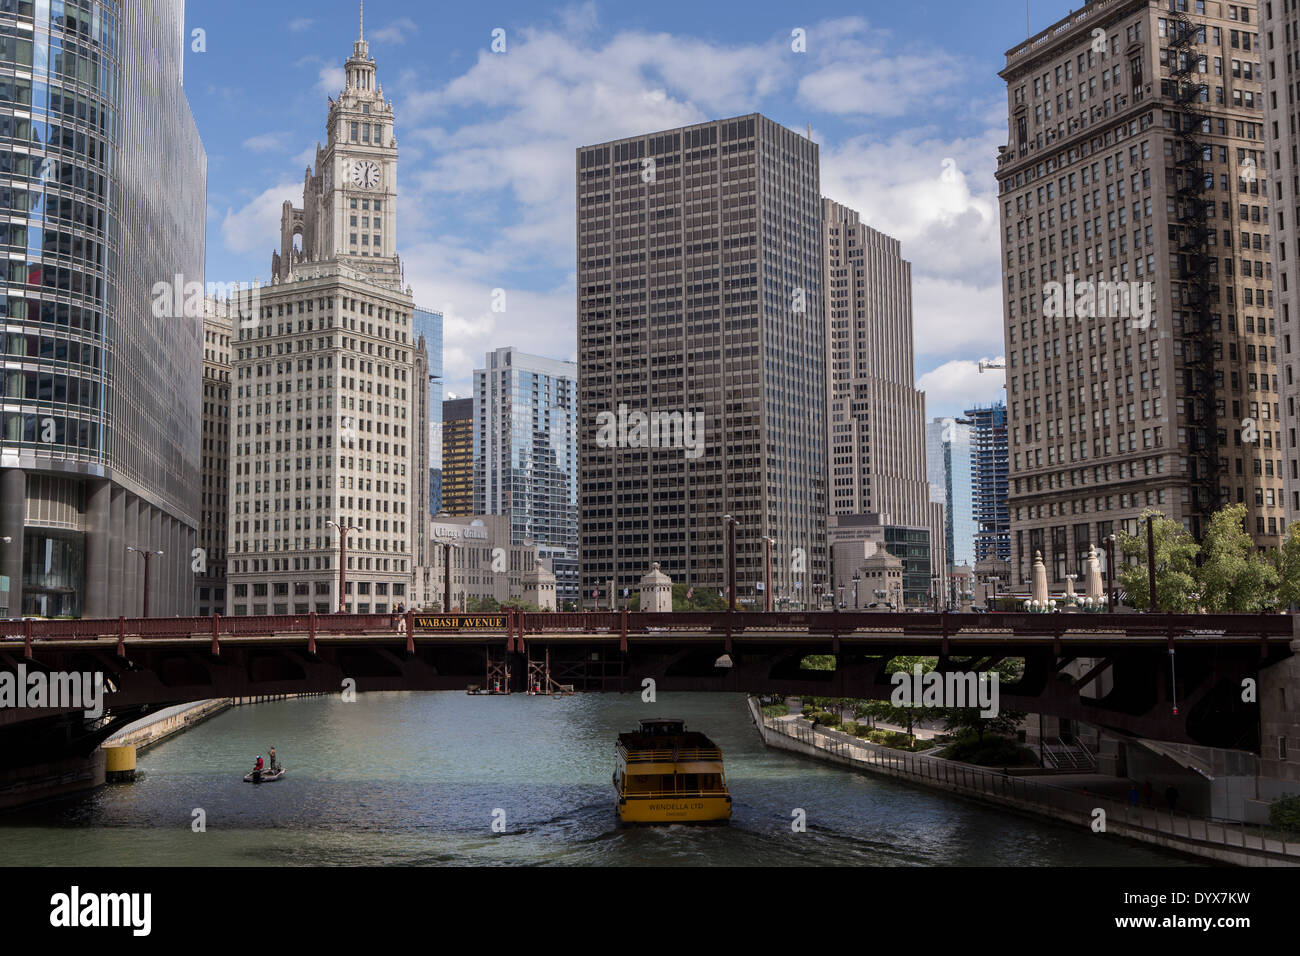 A water taxi travels the Chicago River by Wabash Ave in Chicago, IL. Stock Photo